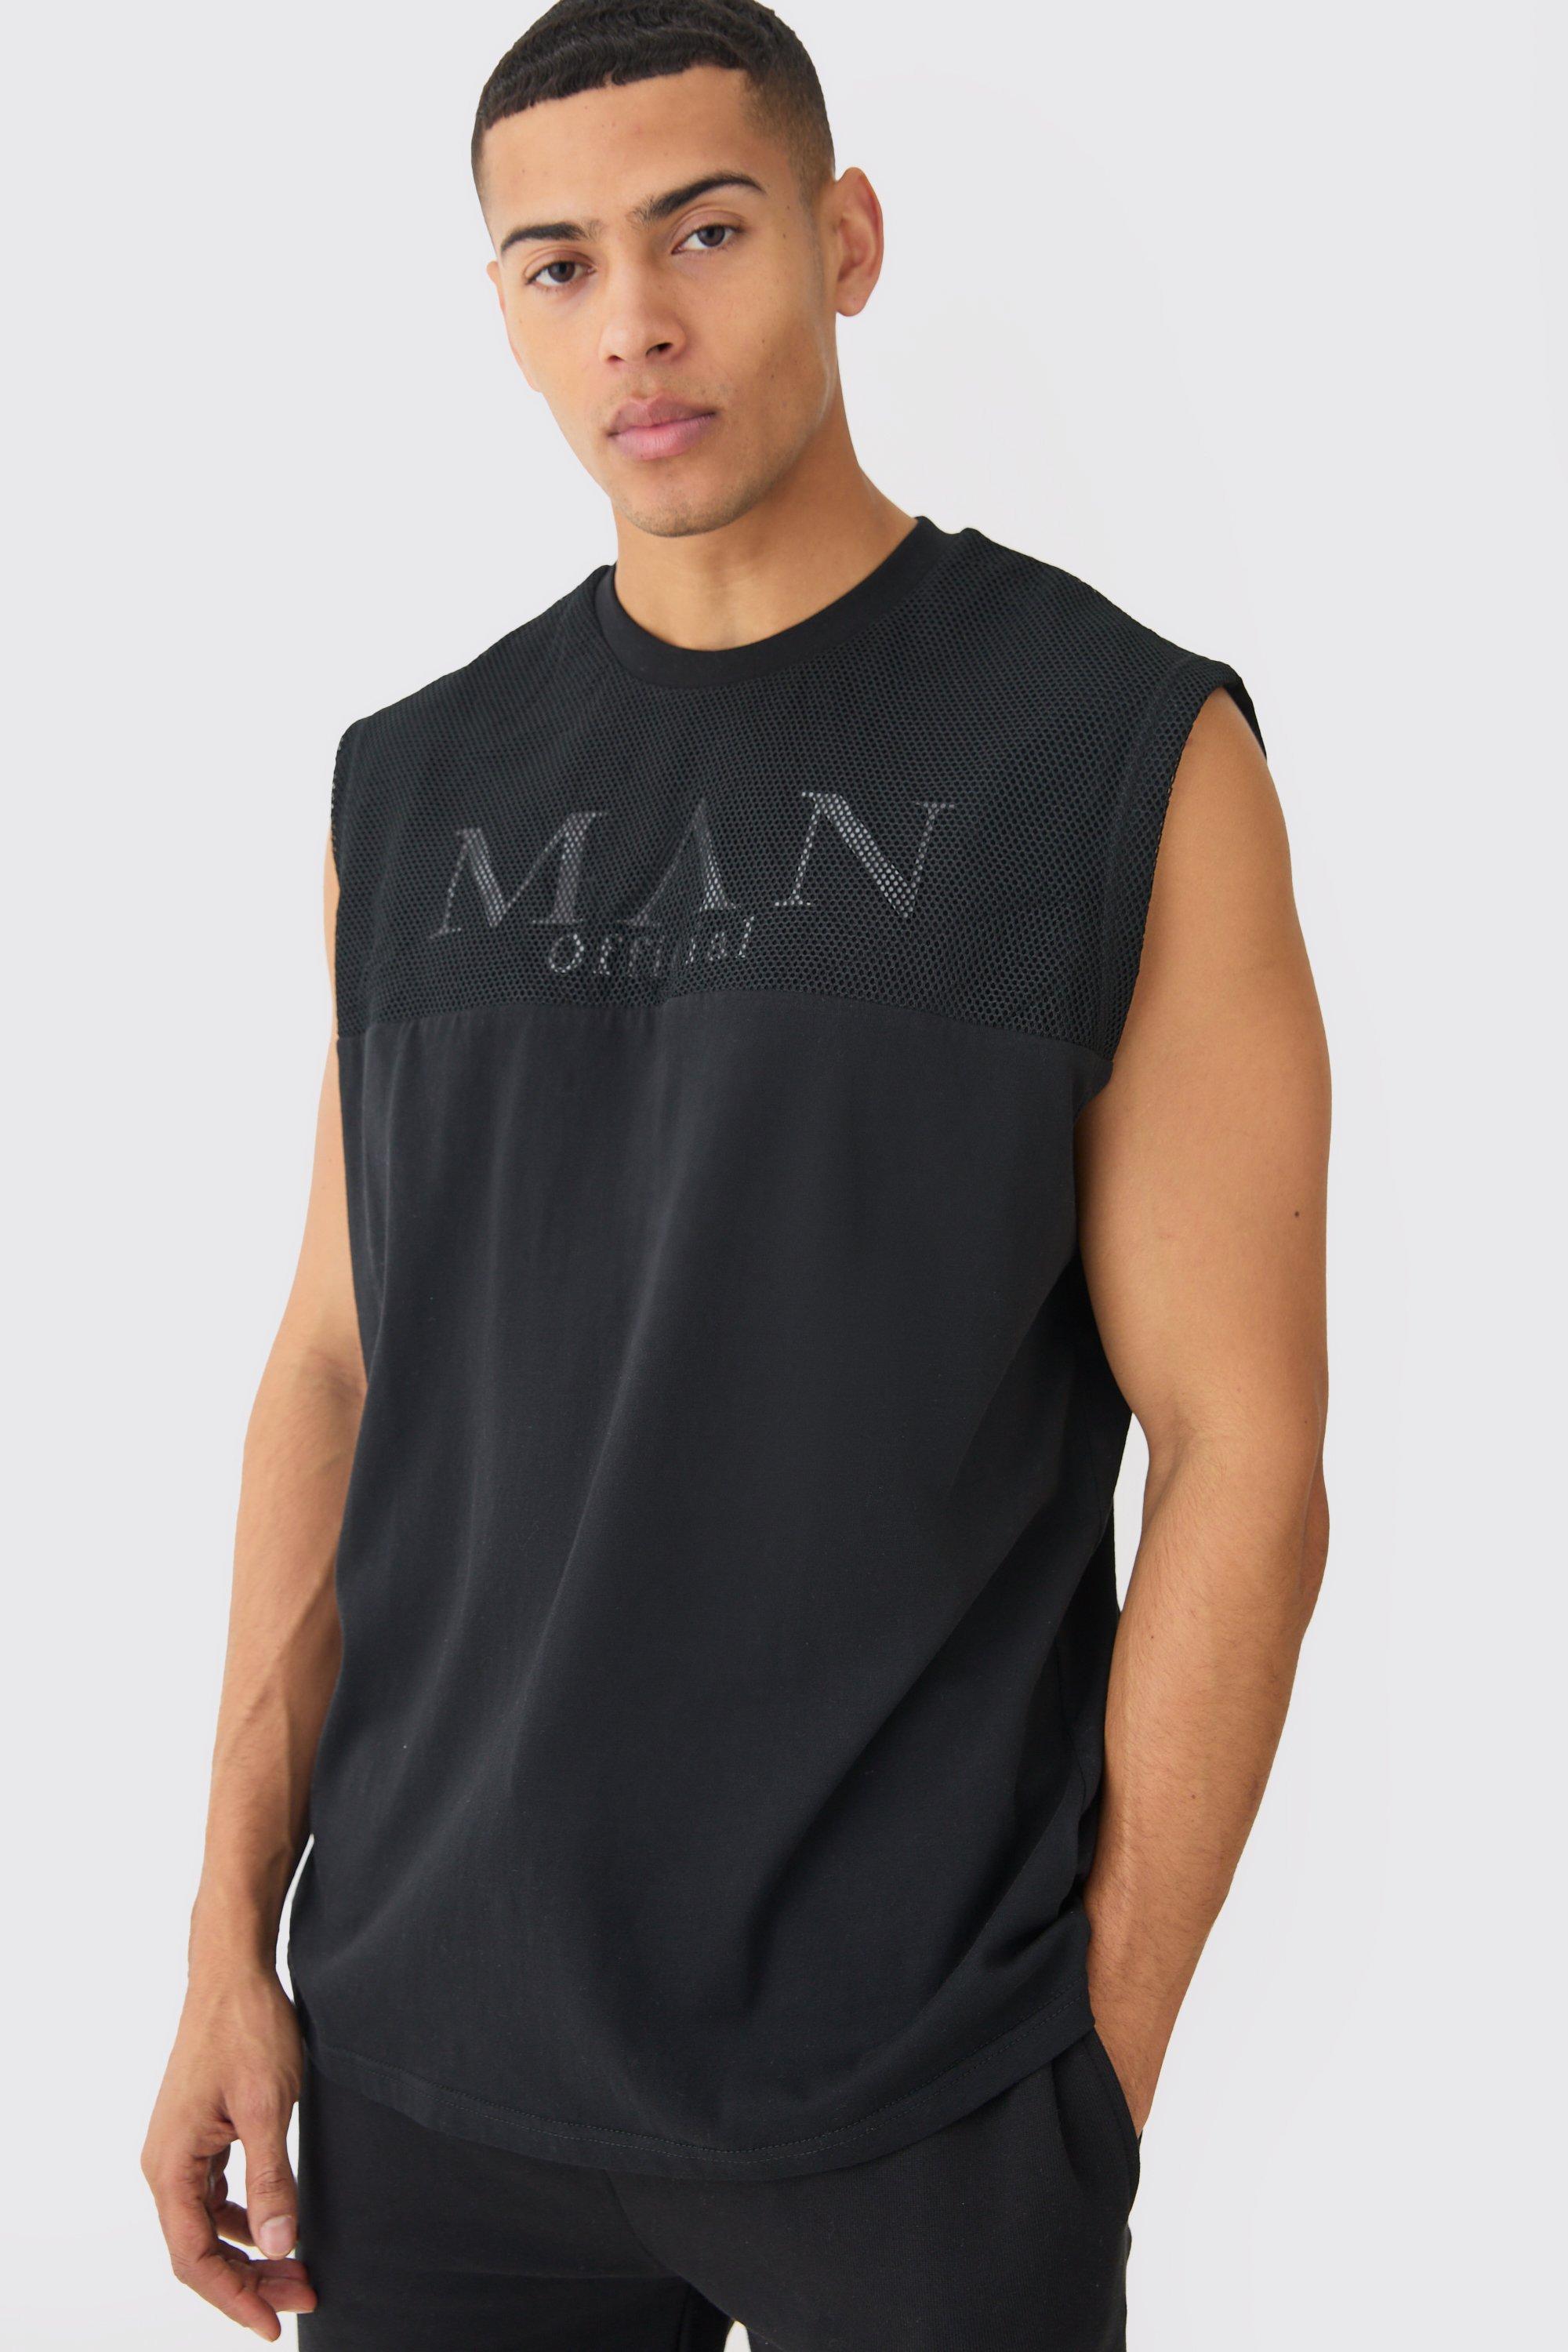 Image of Oversized Man Official Mesh Layer Tank, Nero